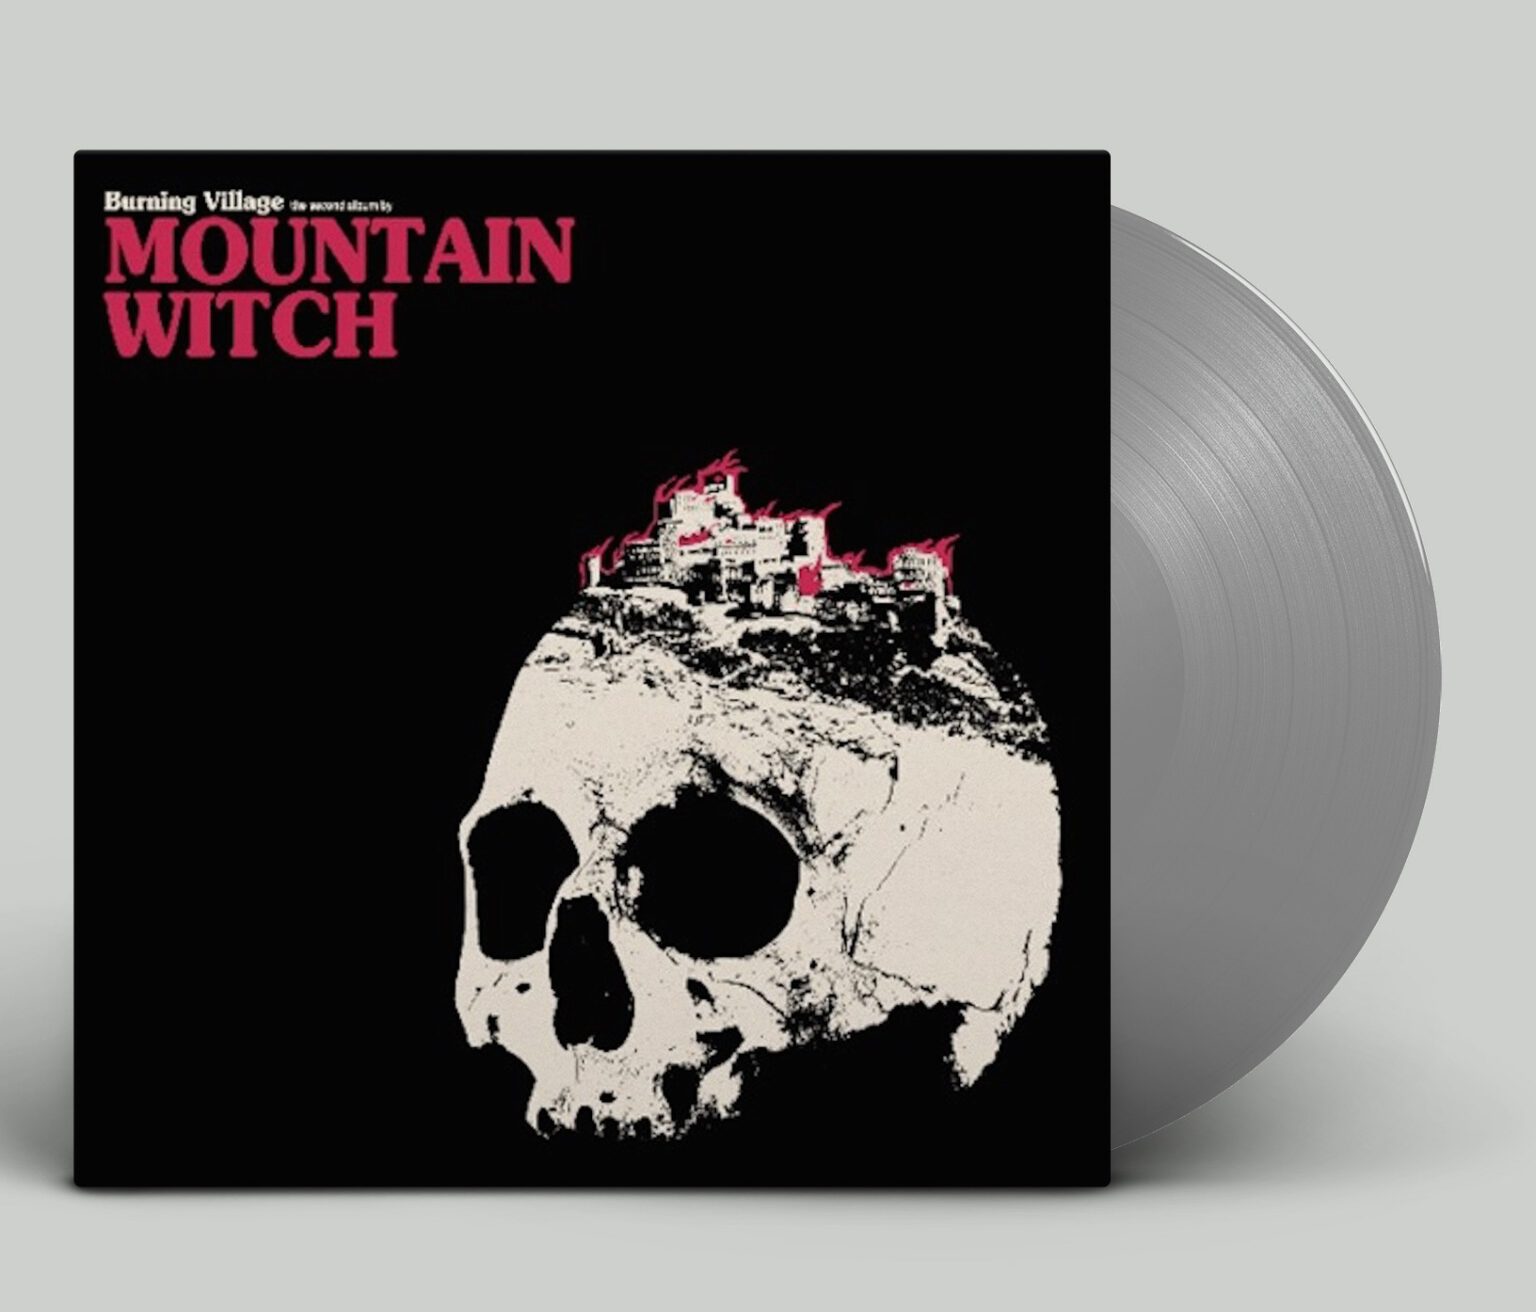 Mountain Witch - Burning Village col.LP/CD Pressing Info: 1st press: 200 copies oxblood wax & 800 copies black wax (SOLD OUT) 2nd press: 500x copies black in bone (SOLD OUT) 3rd pess: 500x brown in clear (SOLD OUT) all copies come with a giant poster